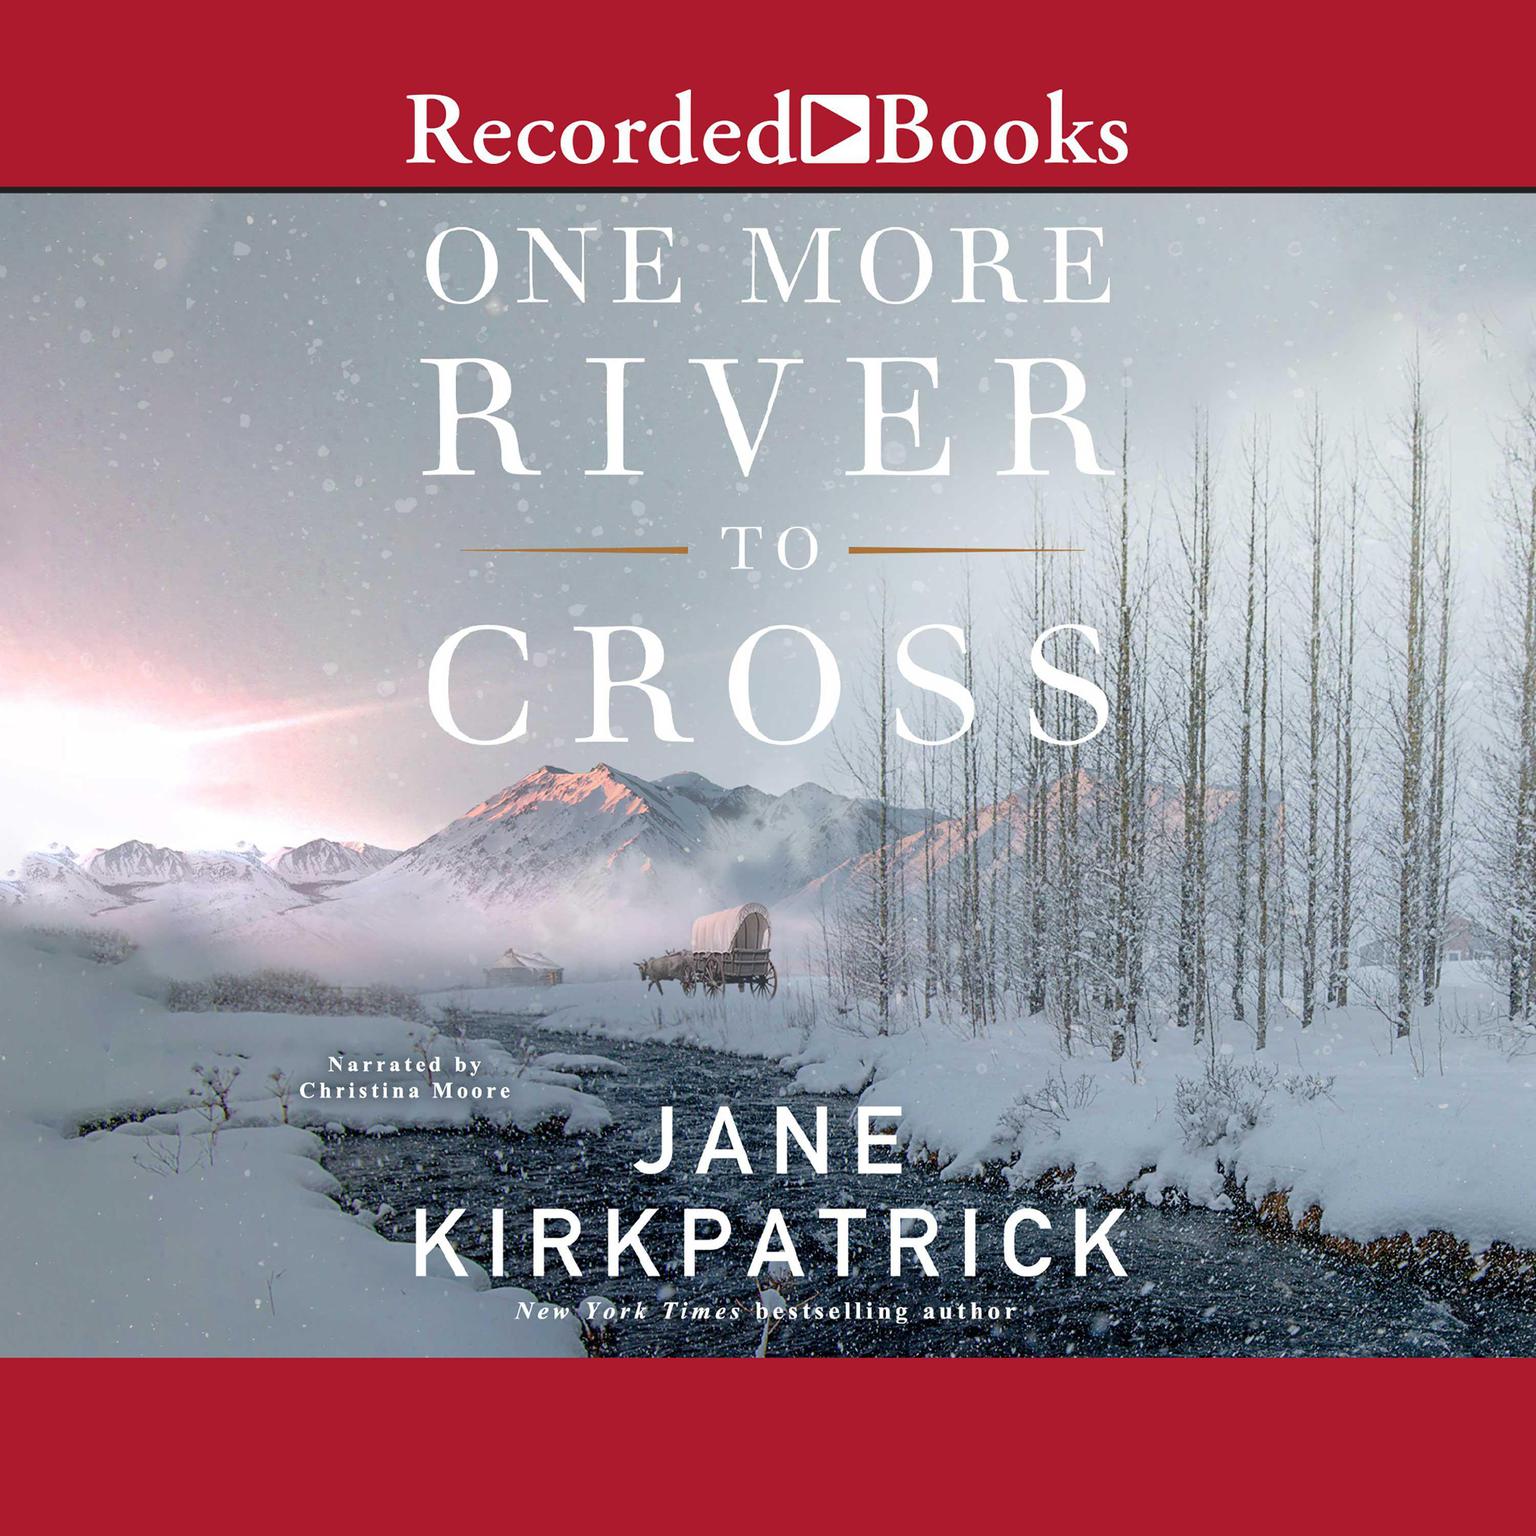 One More River to Cross Audiobook, by Jane Kirkpatrick